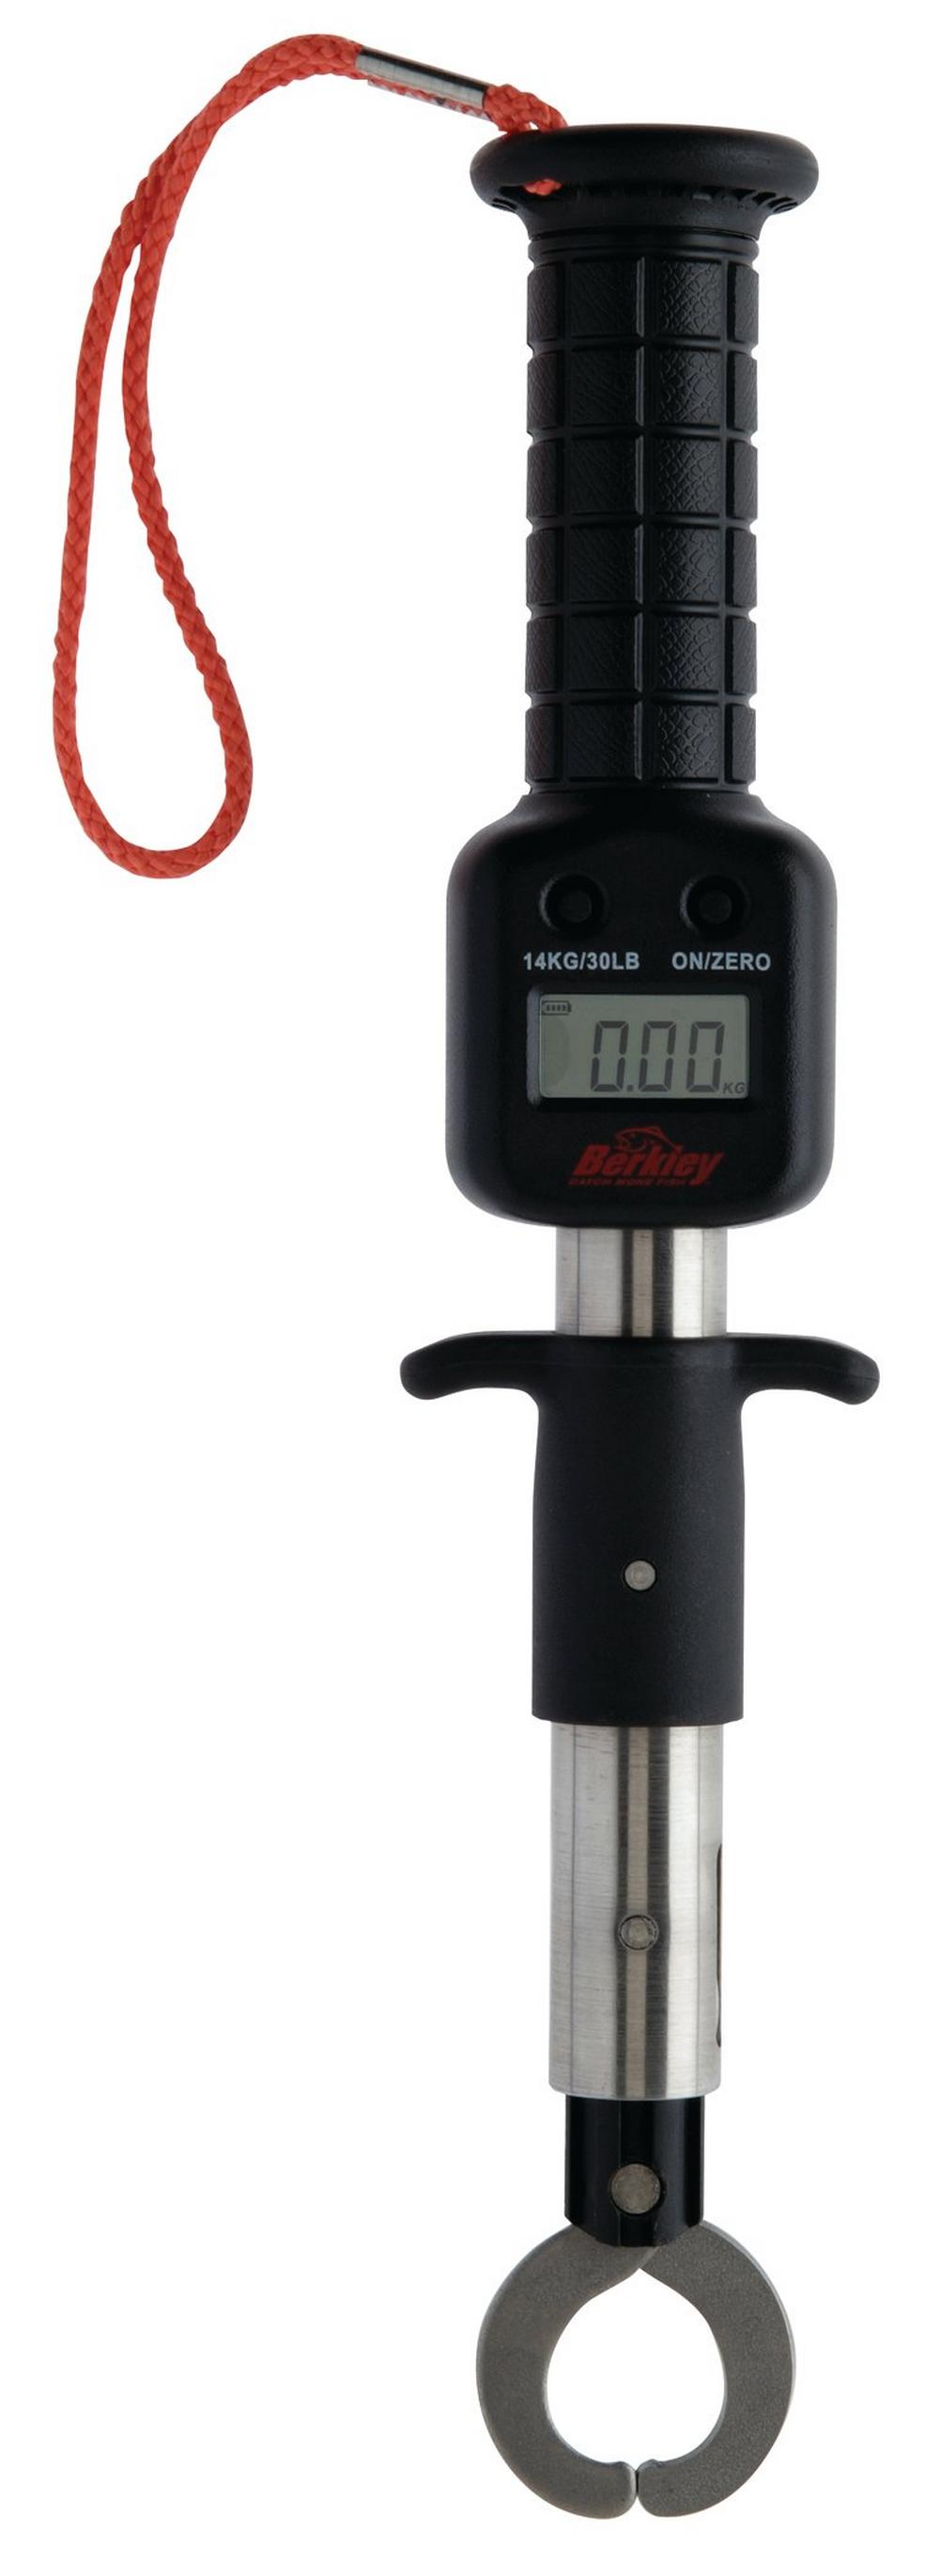 Big Catch Fishing Tackle - Digital Scale with Lip Grip